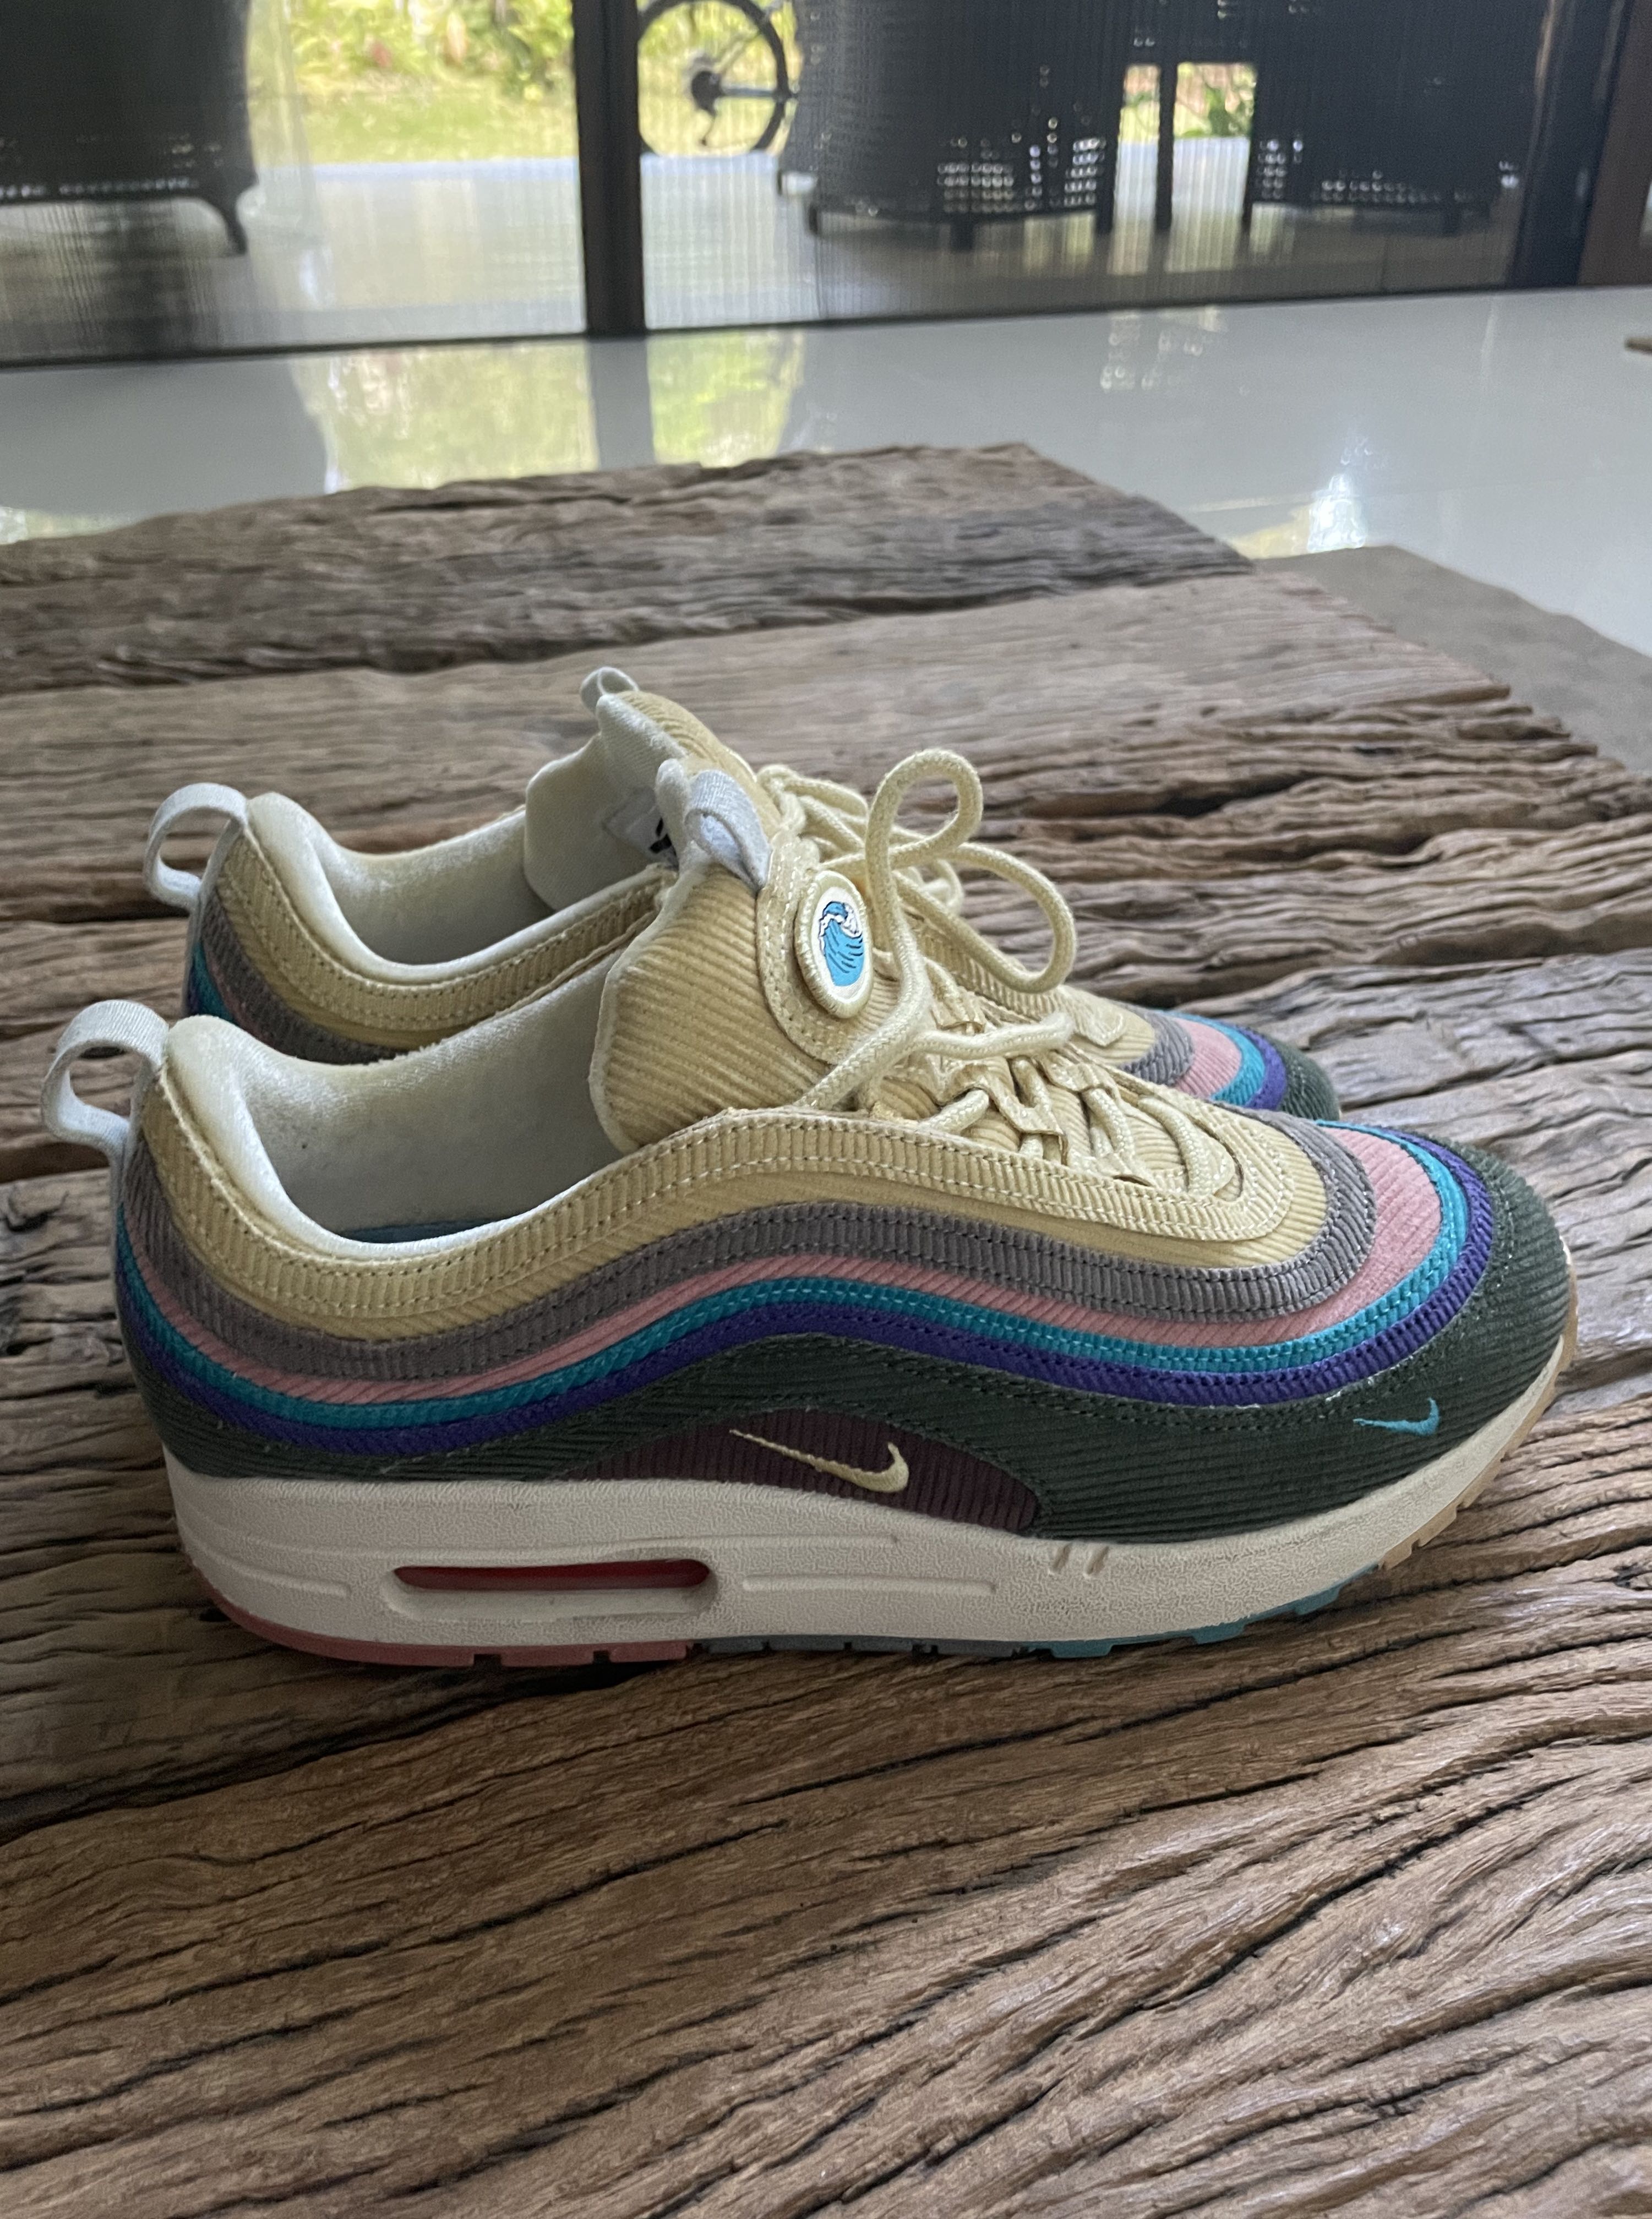 sean wotherspoon air max 97 size 11